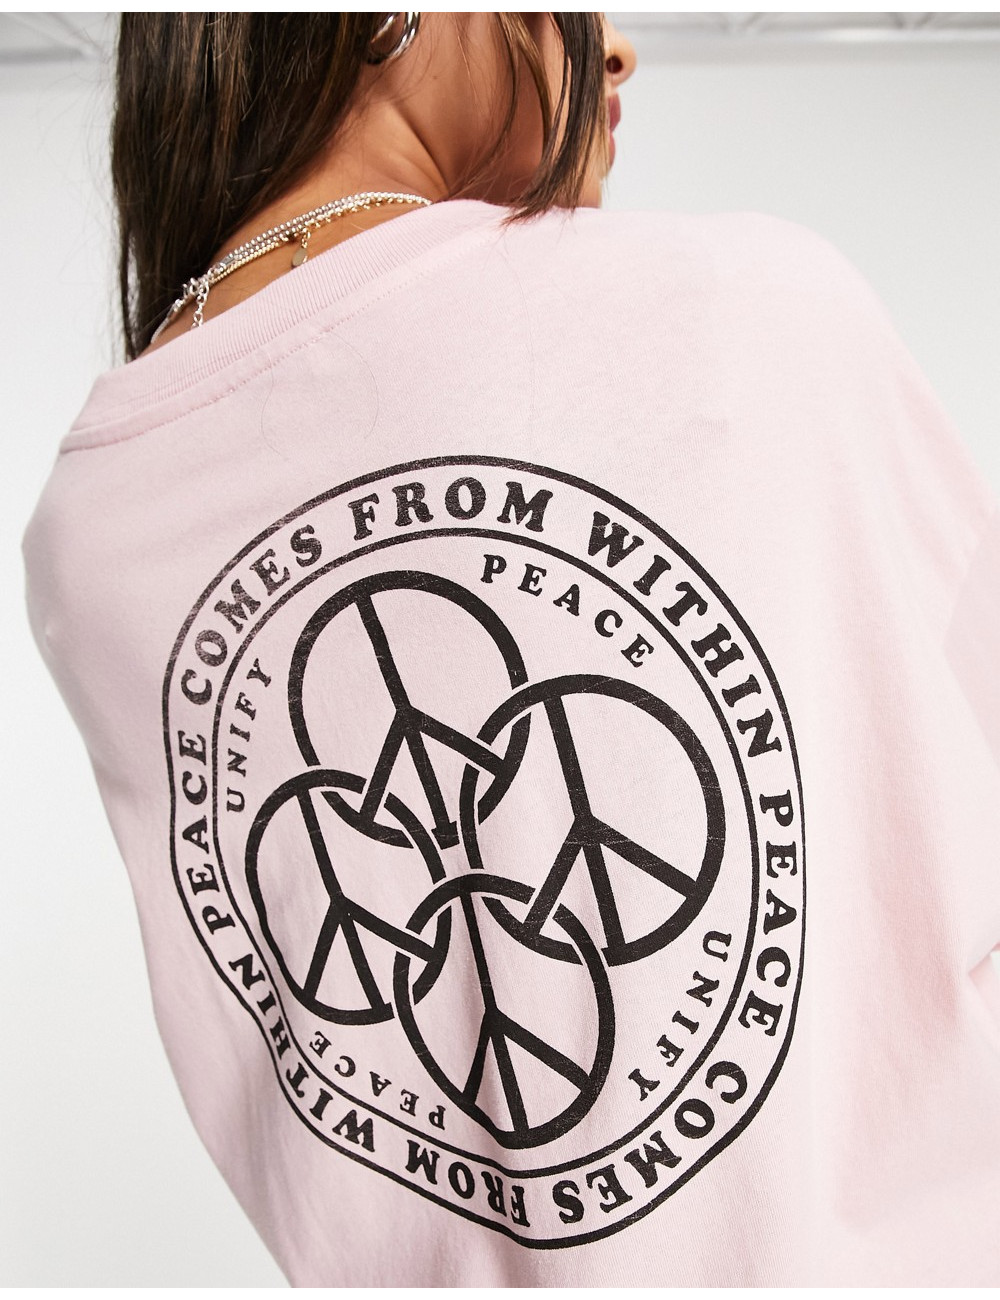 Topshop peace comes from...